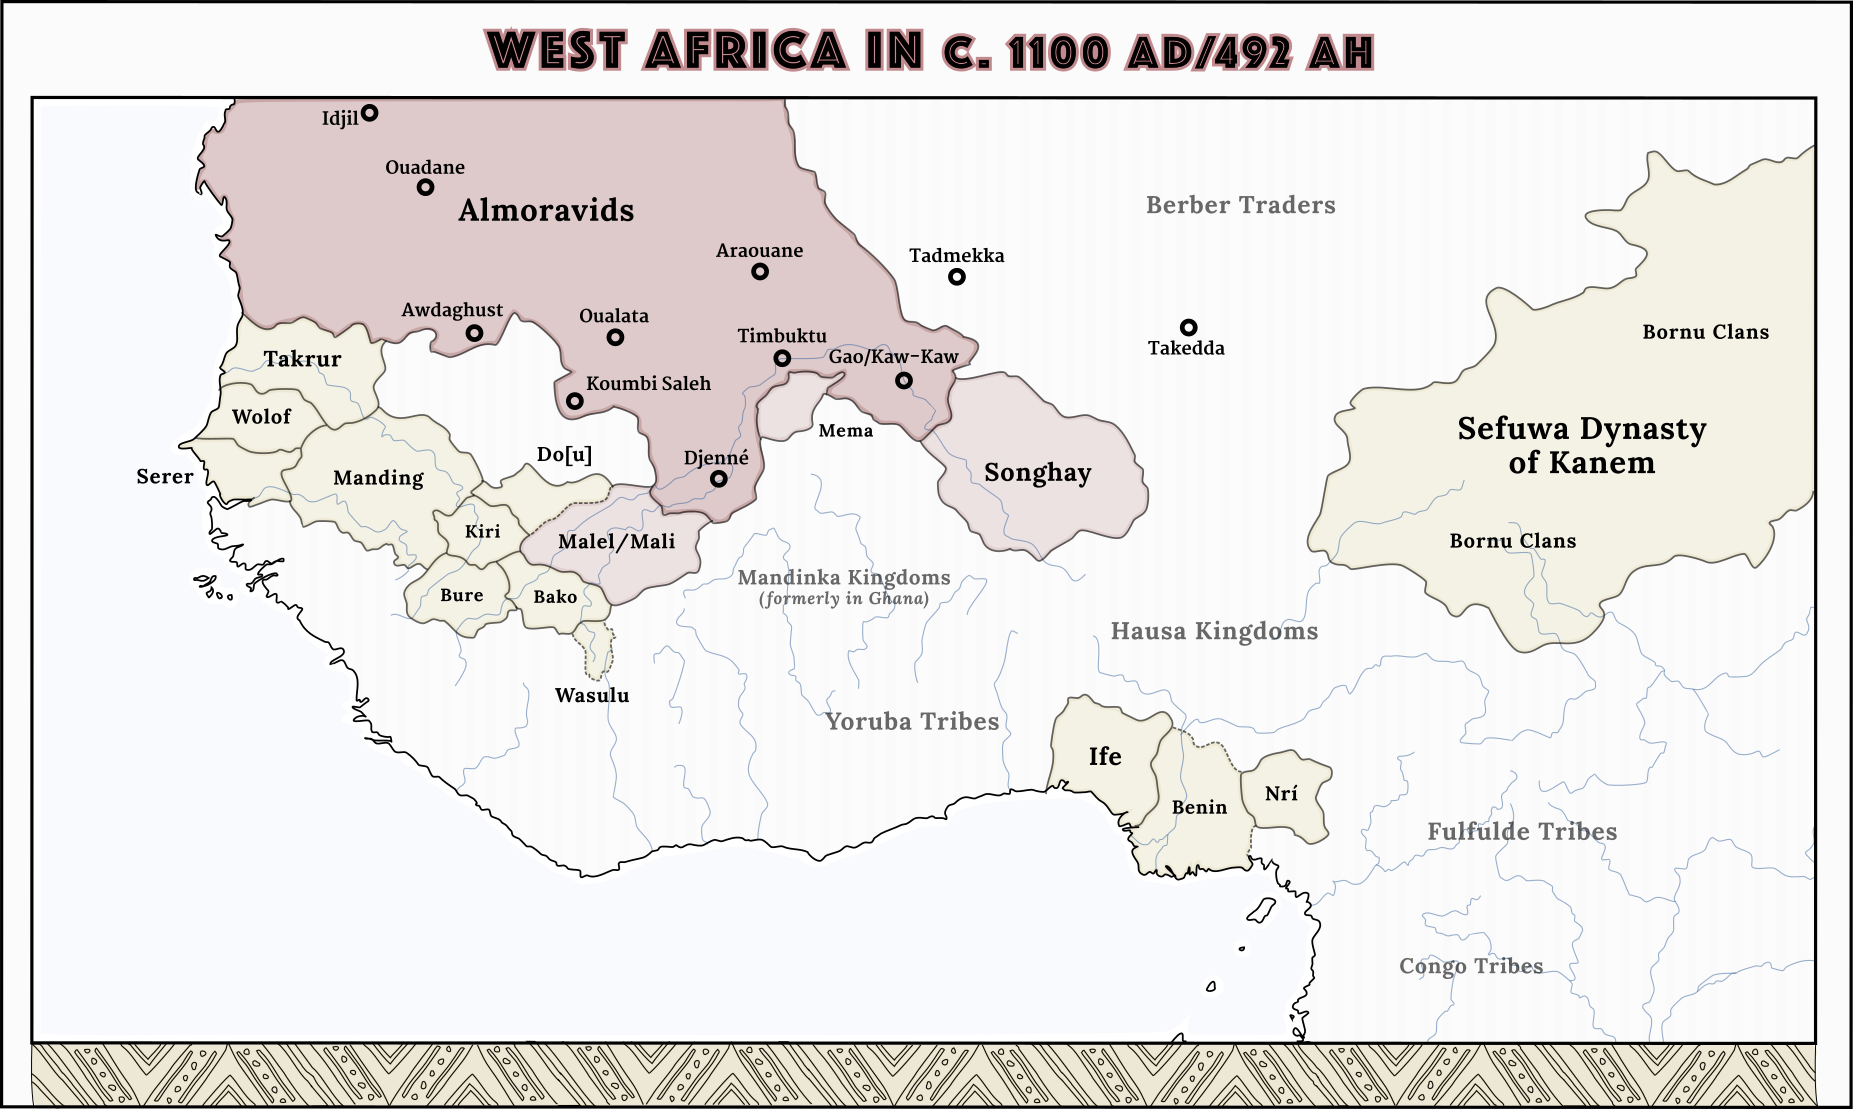 west_africa_in_1100_ce_by_upvoteanthology-d9xulzi.png